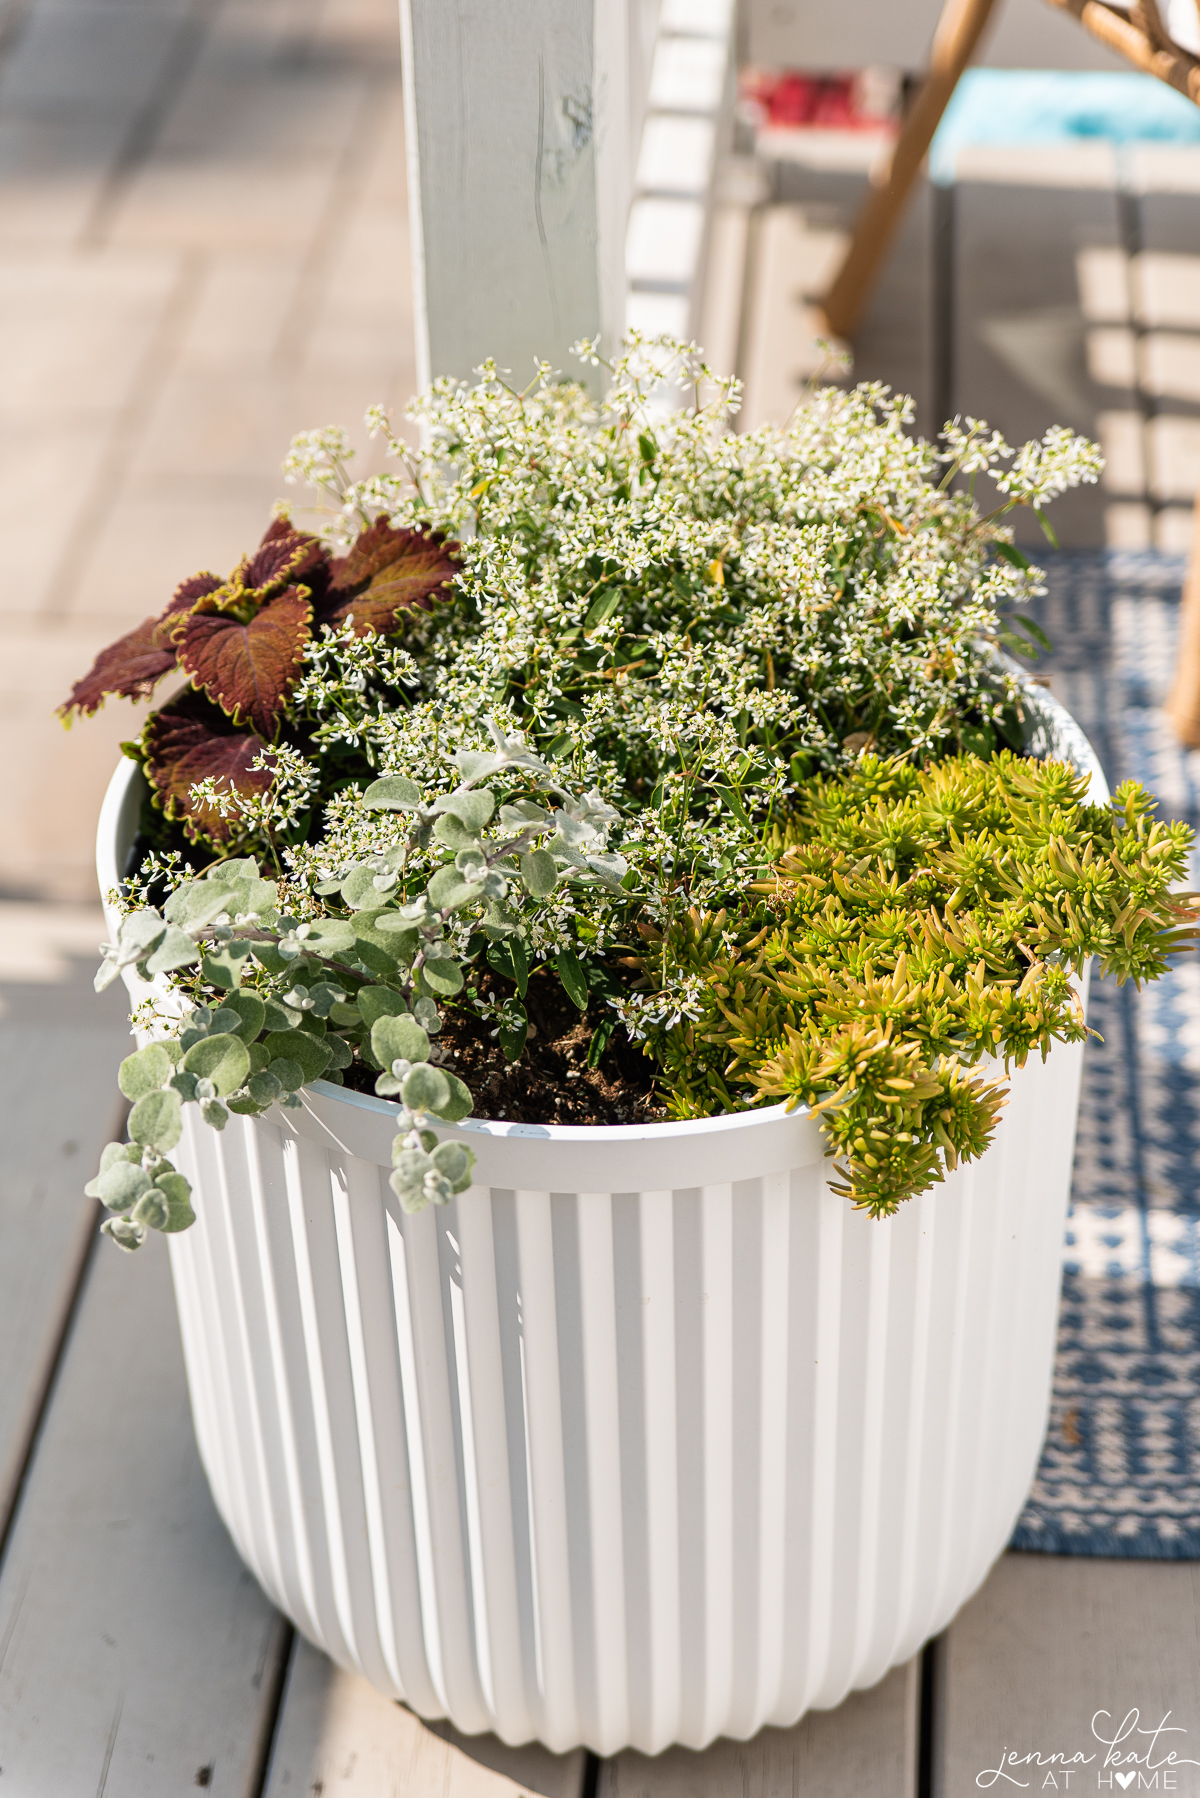 large planter filled with various green and white plants for summer